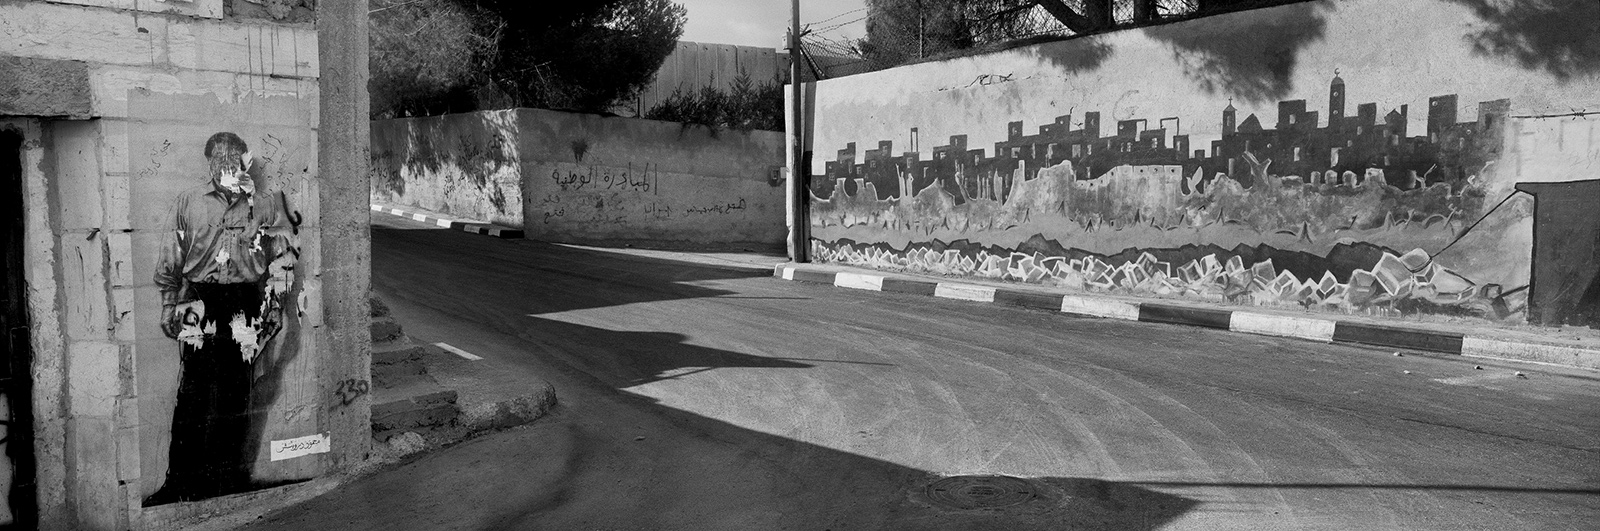 A poster of the Palestinian poet Mahmoud Darwish (left), Aida refugee camp, near Bethlehem, West Bank, 2009; photograph by Josef Koudelka from ‘This Place,’ an exhibition of pictures by twelve photographers of Israel and the West Bank, at the Brooklyn Museum of Art until June 5, 2016